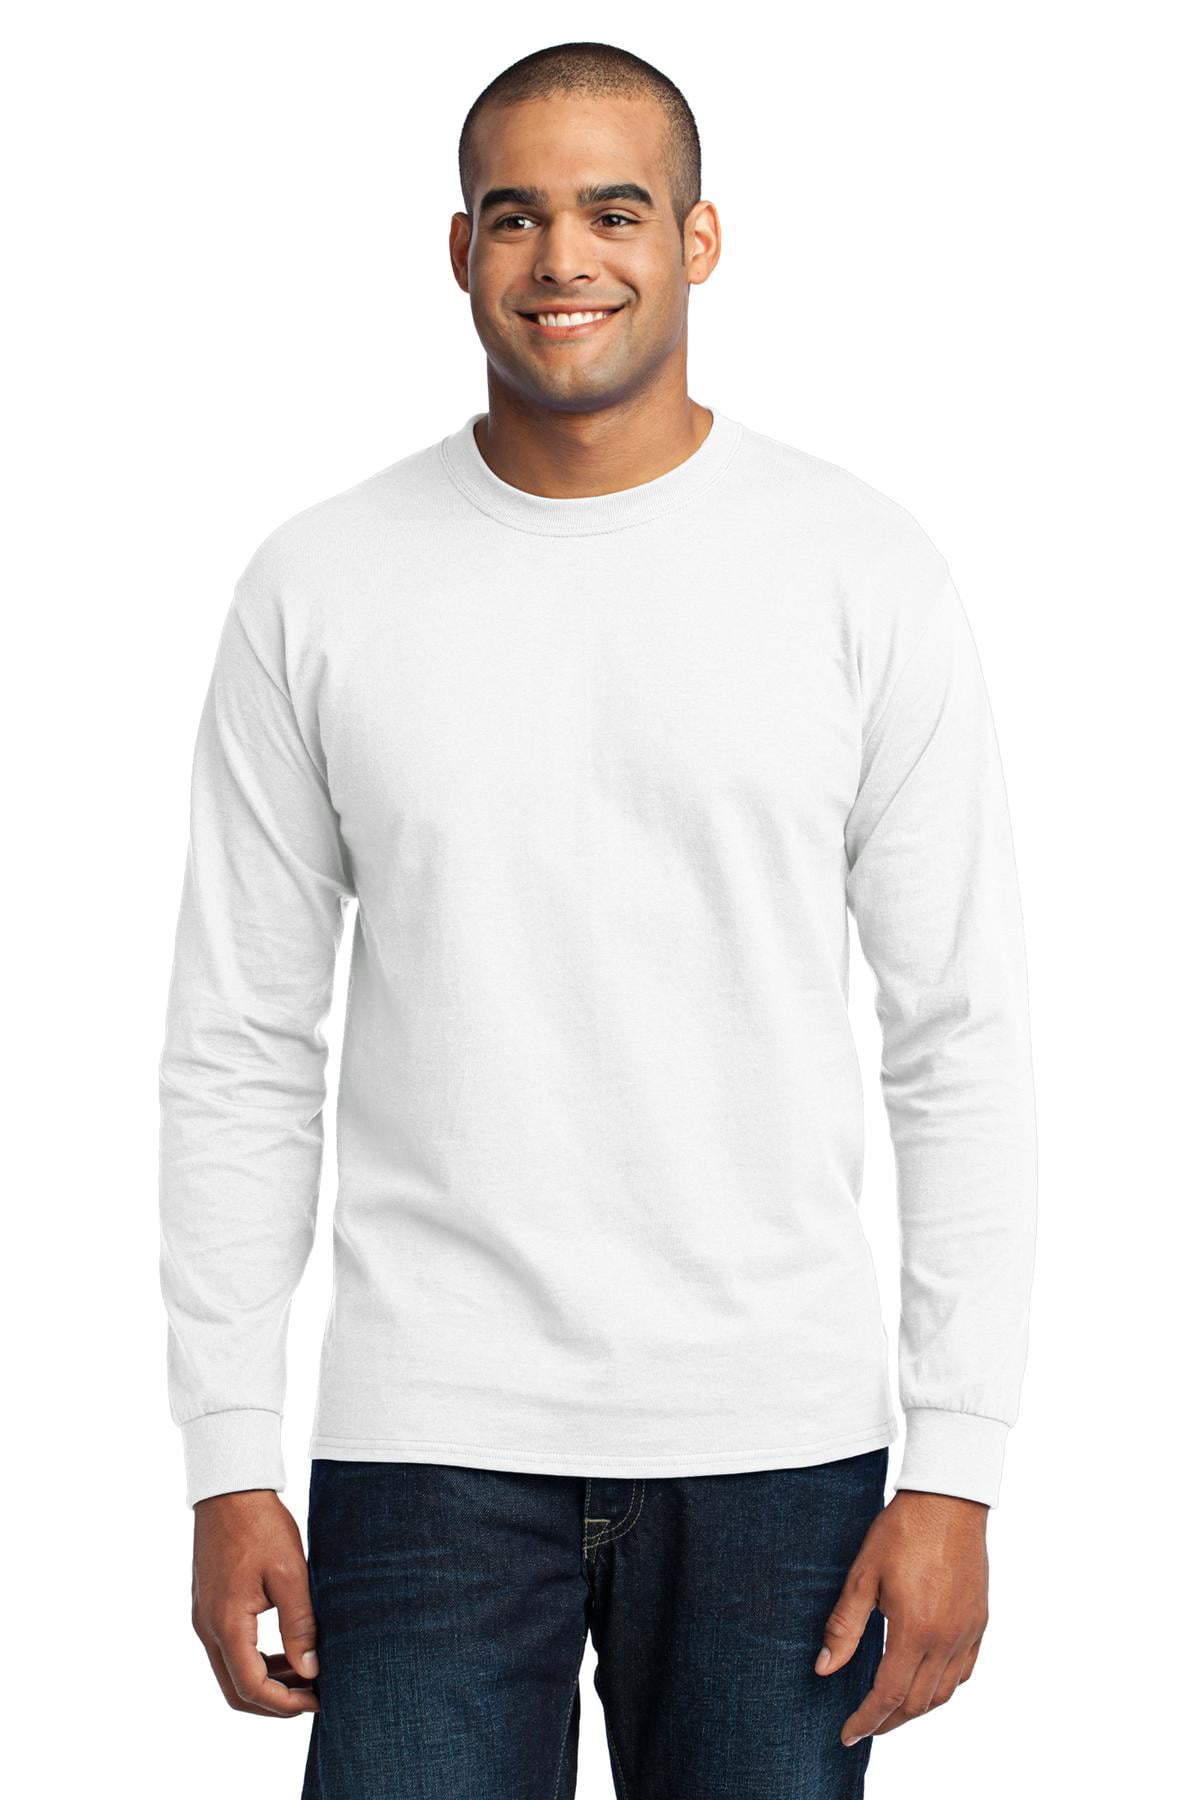 PC55LST Mens Port & Company® Tall Long Sleeve 50/50 Cotton/Poly T-Shirt